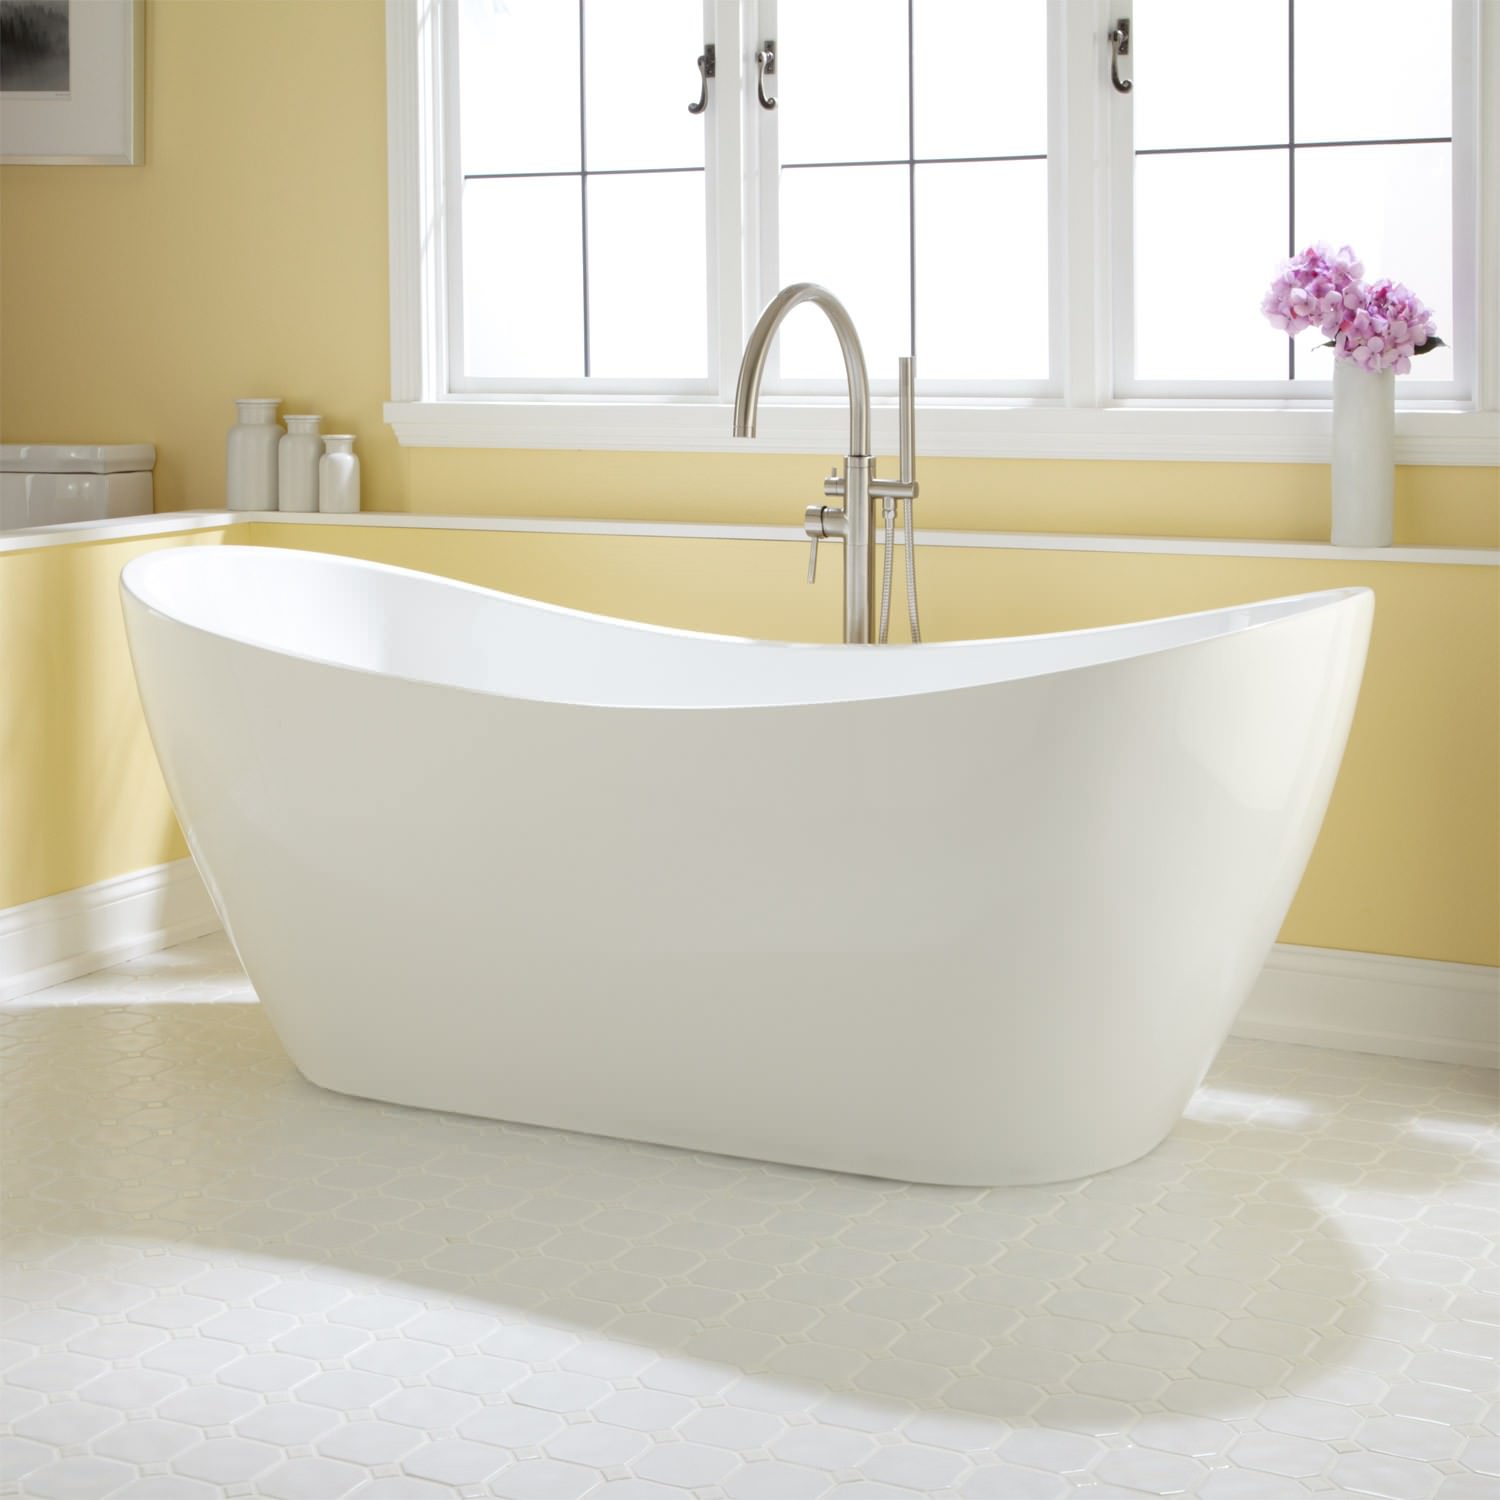 Image of: Stand Alone Tub